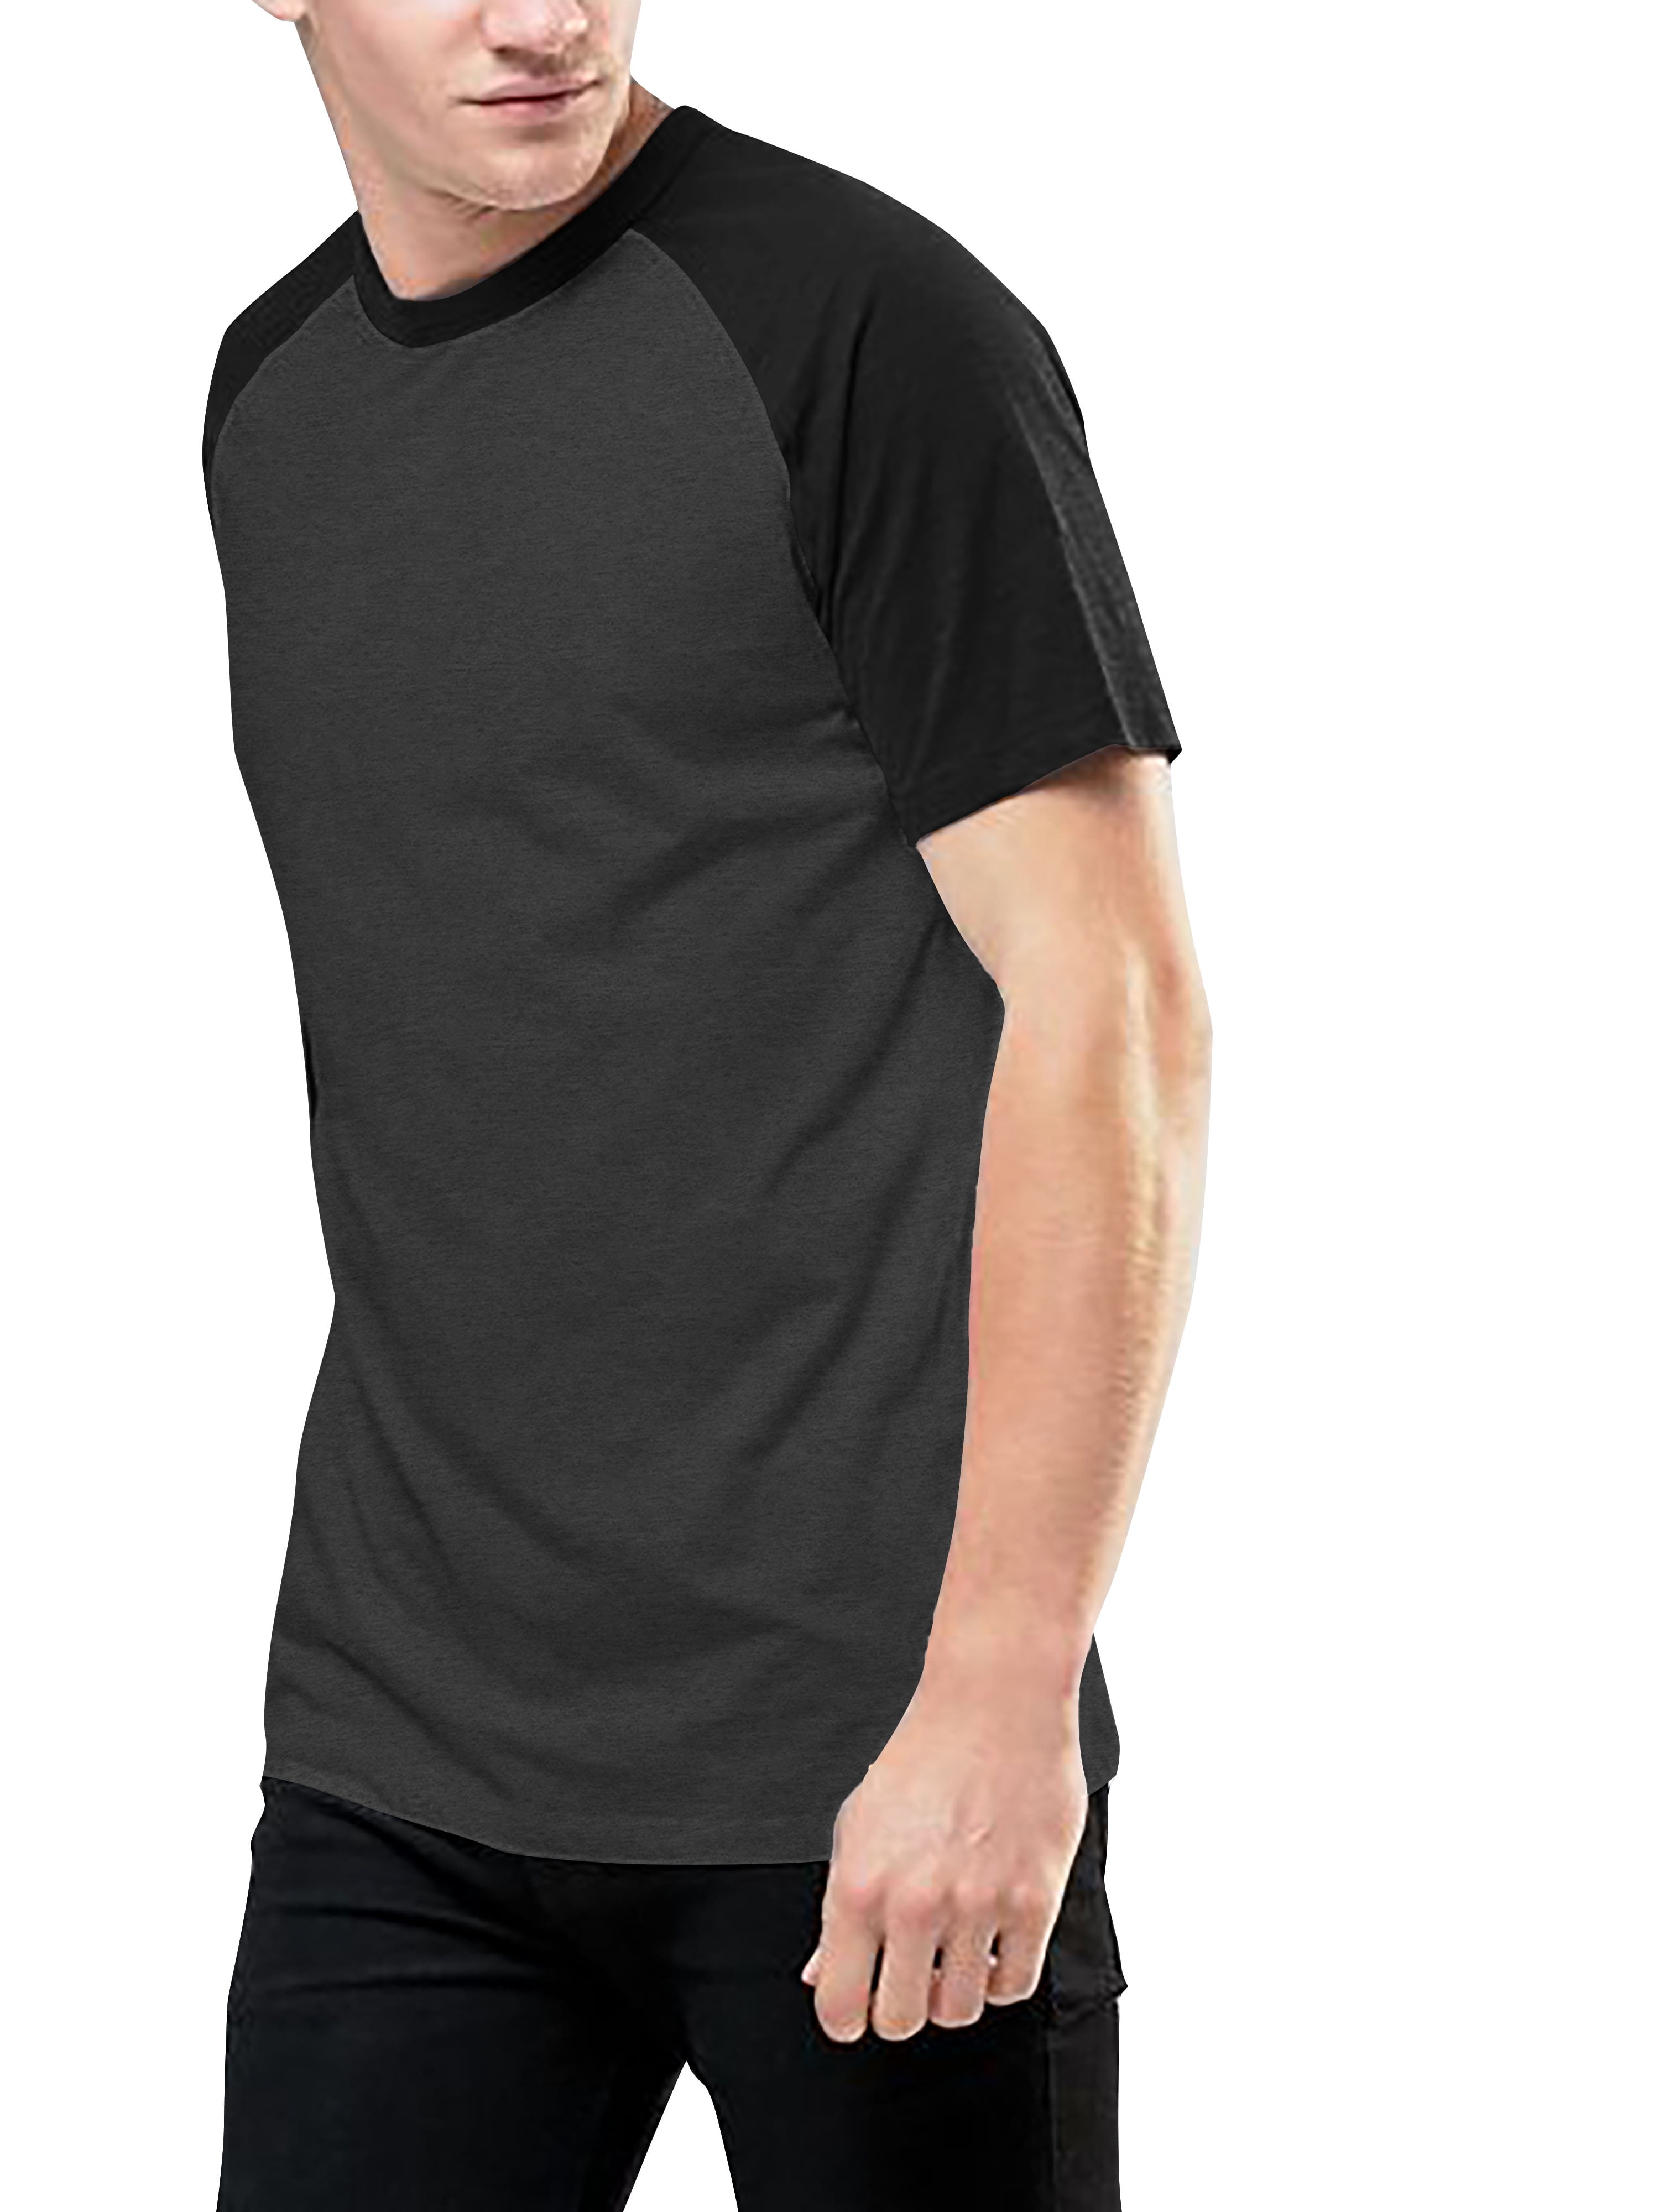 Urban Classics Mens Baseball T-Shirt Contrast Shortsleeves T-Shirt Crew Neck Sizes: S-5XL 100% Jersey Cotton Different Colours Available Sports Shirt 